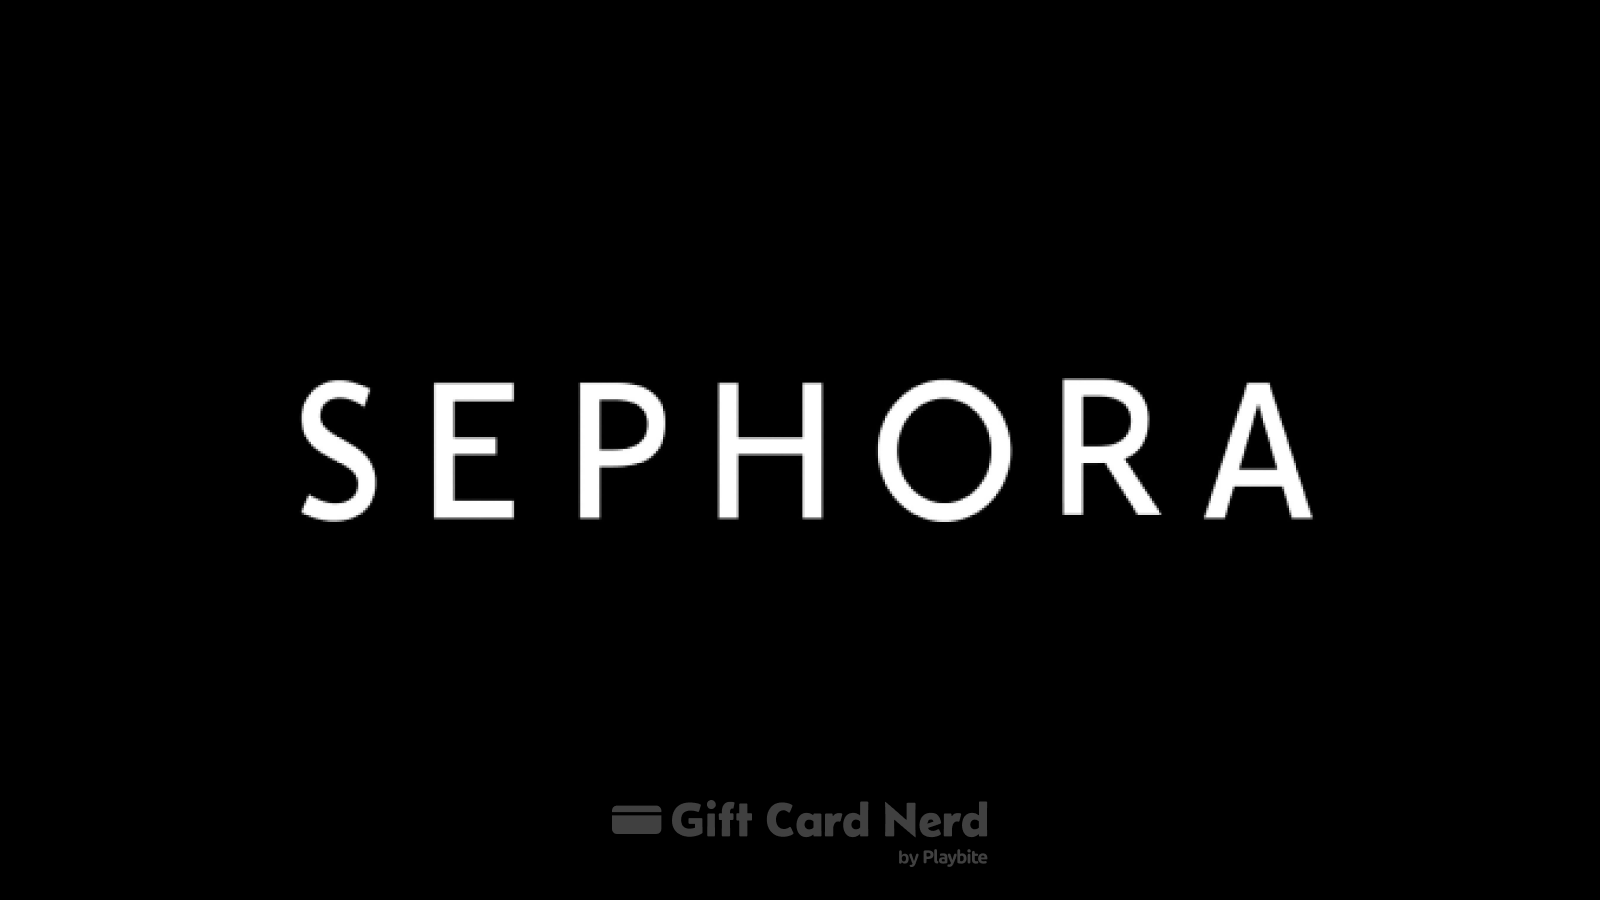 Can You Use a Sephora Gift Card on Uber Eats?